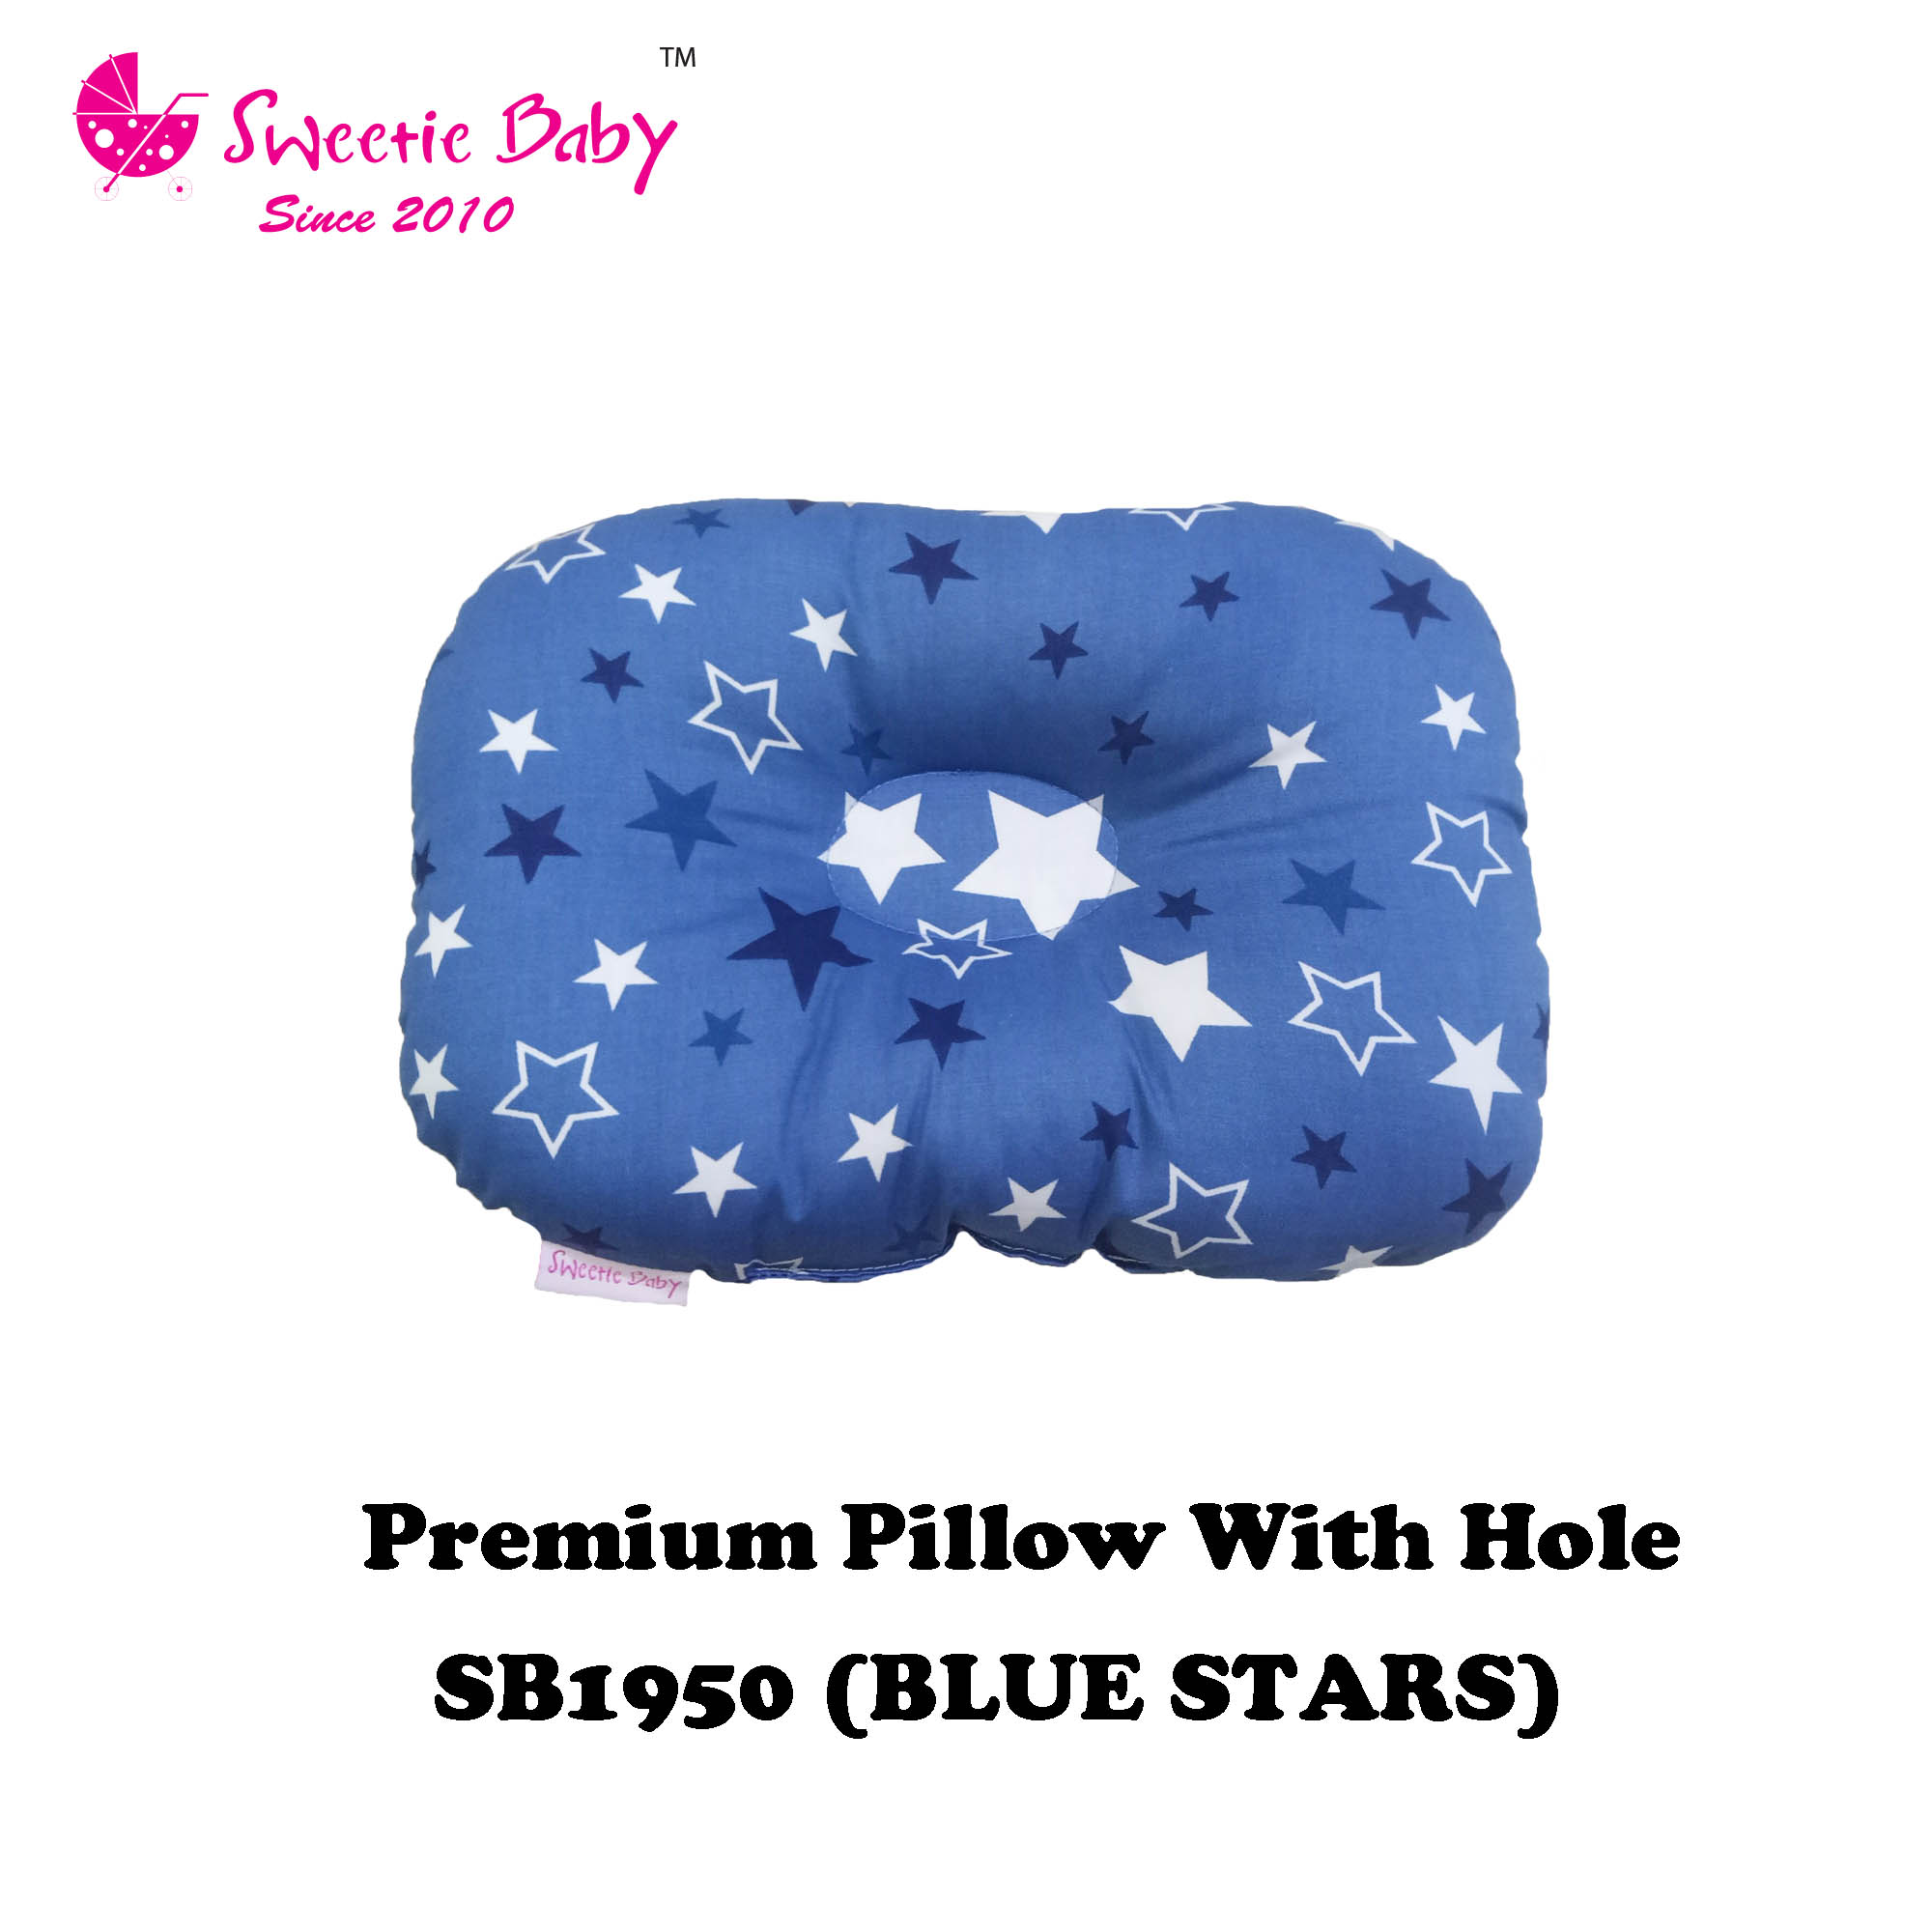 Sweetie Baby Dimple Pillow (SB1950)